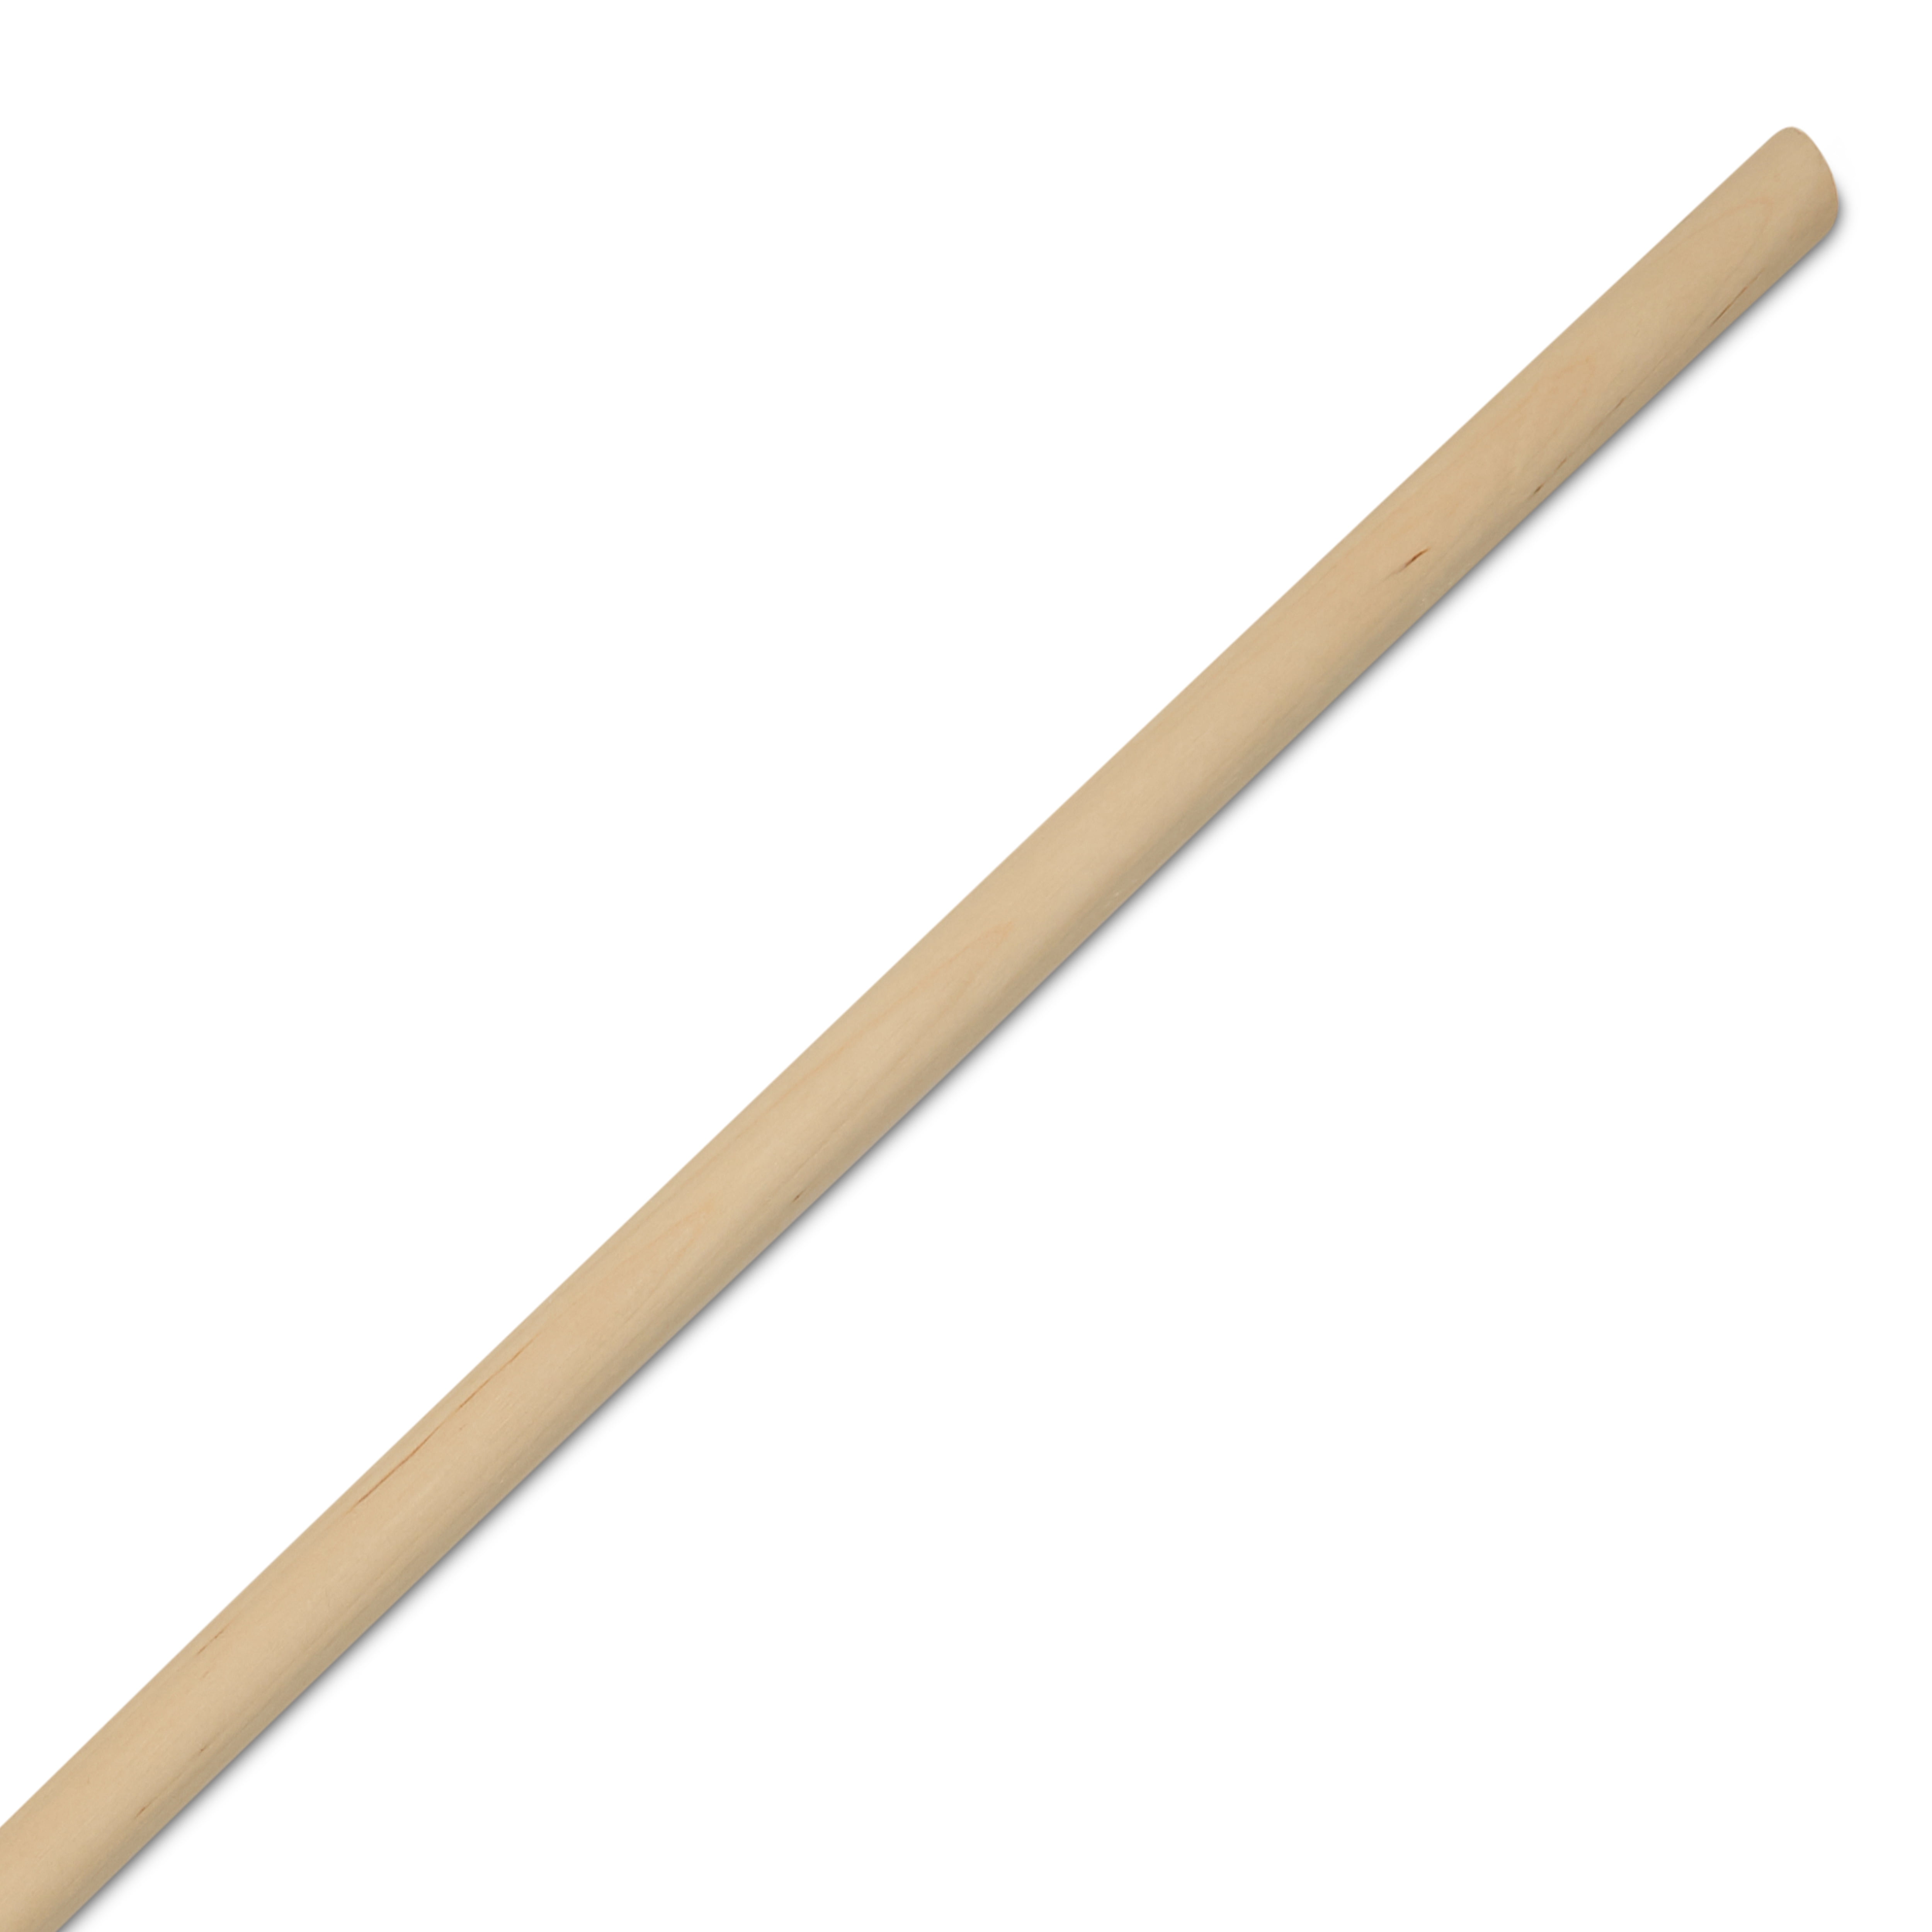 Dowel Rods Wood Sticks Wooden Dowel Rods - 1/2 x 12 Inch Unfinished  Hardwood Sticks - for Crafts and DIYers - 100 Pieces by Woodpeckers 